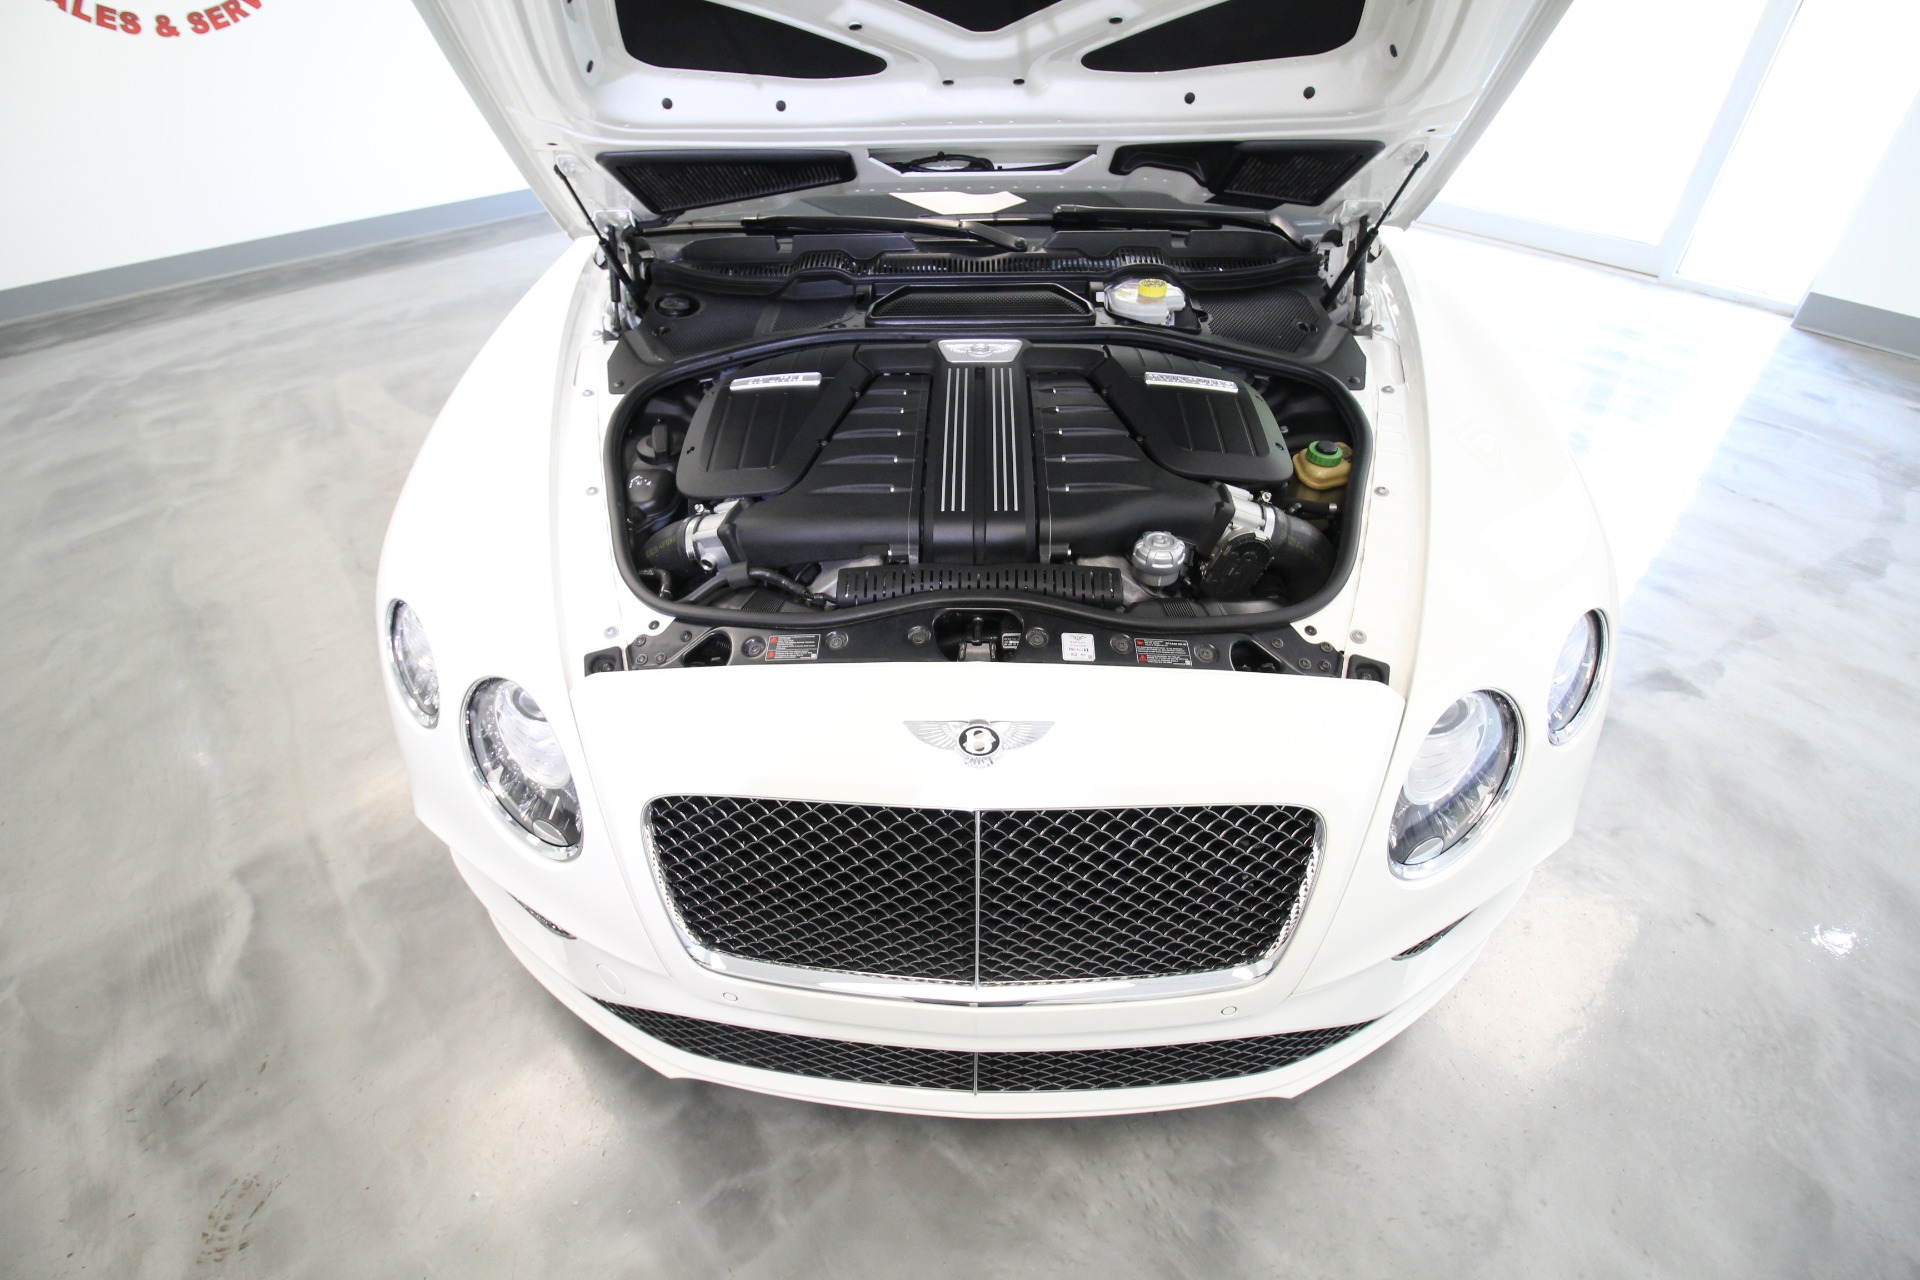 Used 2016 White Bentley Continental GTC Speed W12 SUPERB LOW MILES STUNNING | Albany, NY